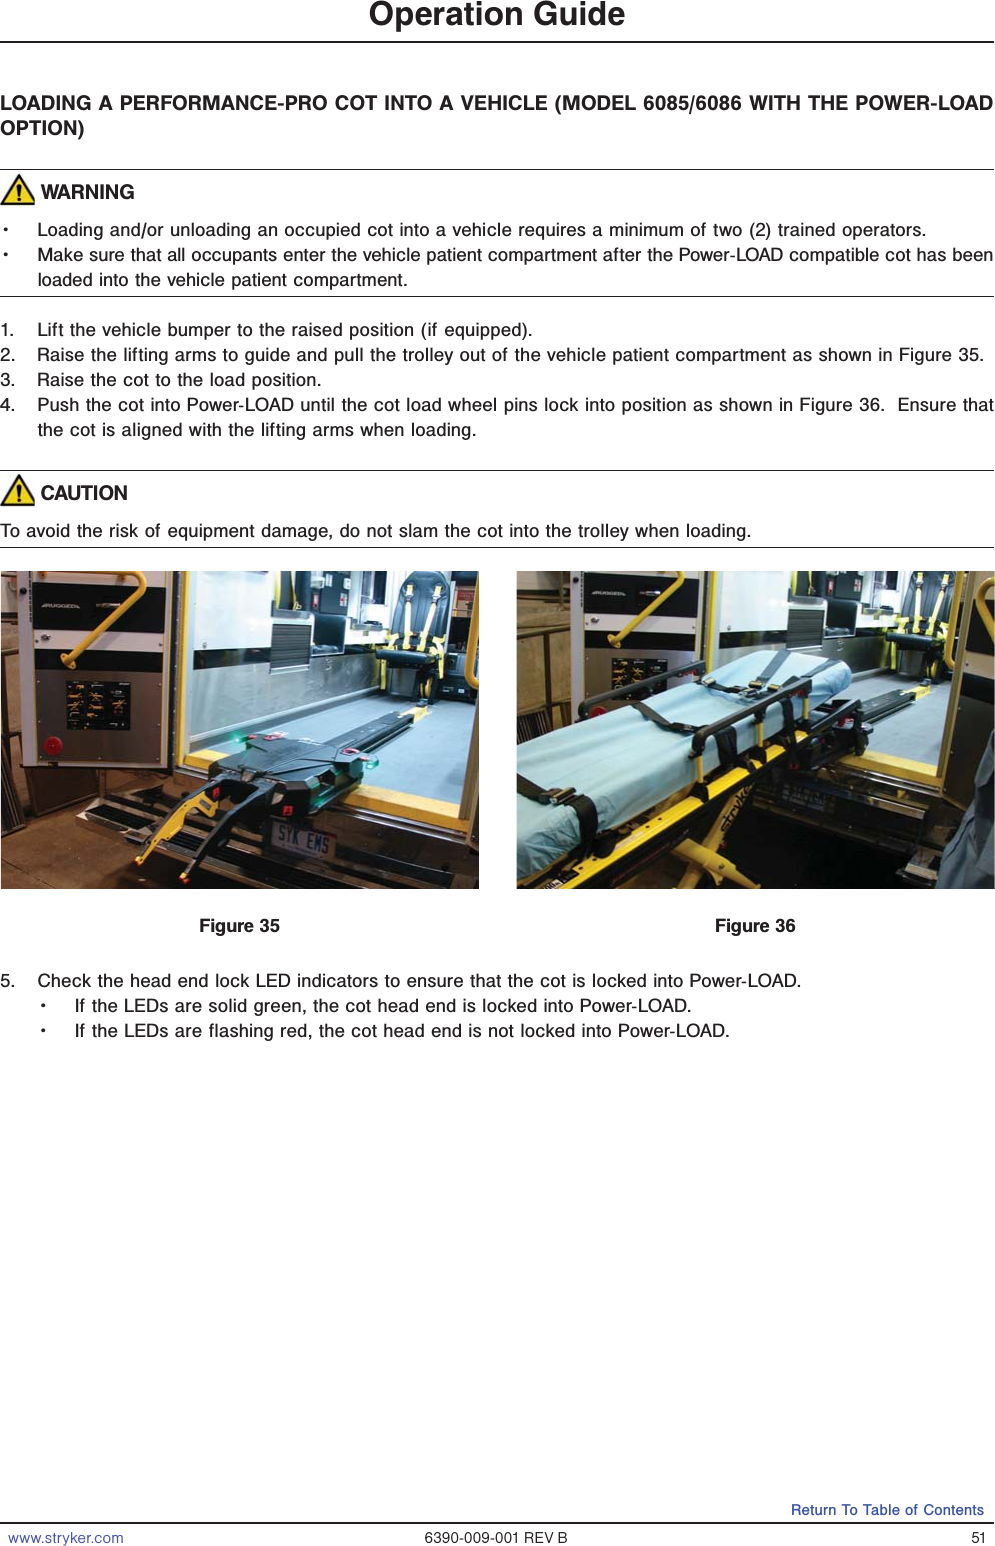 www.stryker.com 6390-009-001 REV B 51Return To Table of ContentsLOADING A PERFORMANCE-PRO COT INTO A VEHICLE (MODEL 6085/6086 WITH THE POWER-LOAD OPTION) WARNINGǨɣ Loading and/or unloading an occupied cot into a vehicle requires a minimum of two (2) trained operators.Ǩɣ Make sure that all occupants enter the vehicle patient compartment after the Power-LOAD compatible cot has been loaded into the vehicle patient compartment.1.  Lift the vehicle bumper to the raised position (if equipped).2.  Raise the lifting arms to guide and pull the trolley out of the vehicle patient compartment as shown in Figure 35.3.  Raise the cot to the load position.4.  Push the cot into Power-LOAD until the cot load wheel pins lock into position as shown in Figure 36.  Ensure that the cot is aligned with the lifting arms when loading.   CAUTIONTo avoid the risk of equipment damage, do not slam the cot into the trolley when loading.5.  Check the head end lock LED indicators to ensure that the cot is locked into Power-LOAD.Ǩɣ If the LEDs are solid green, the cot head end is locked into Power-LOAD.Ǩɣ If the LEDs are flashing red, the cot head end is not locked into Power-LOAD.Operation GuideFigure 35 Figure 36